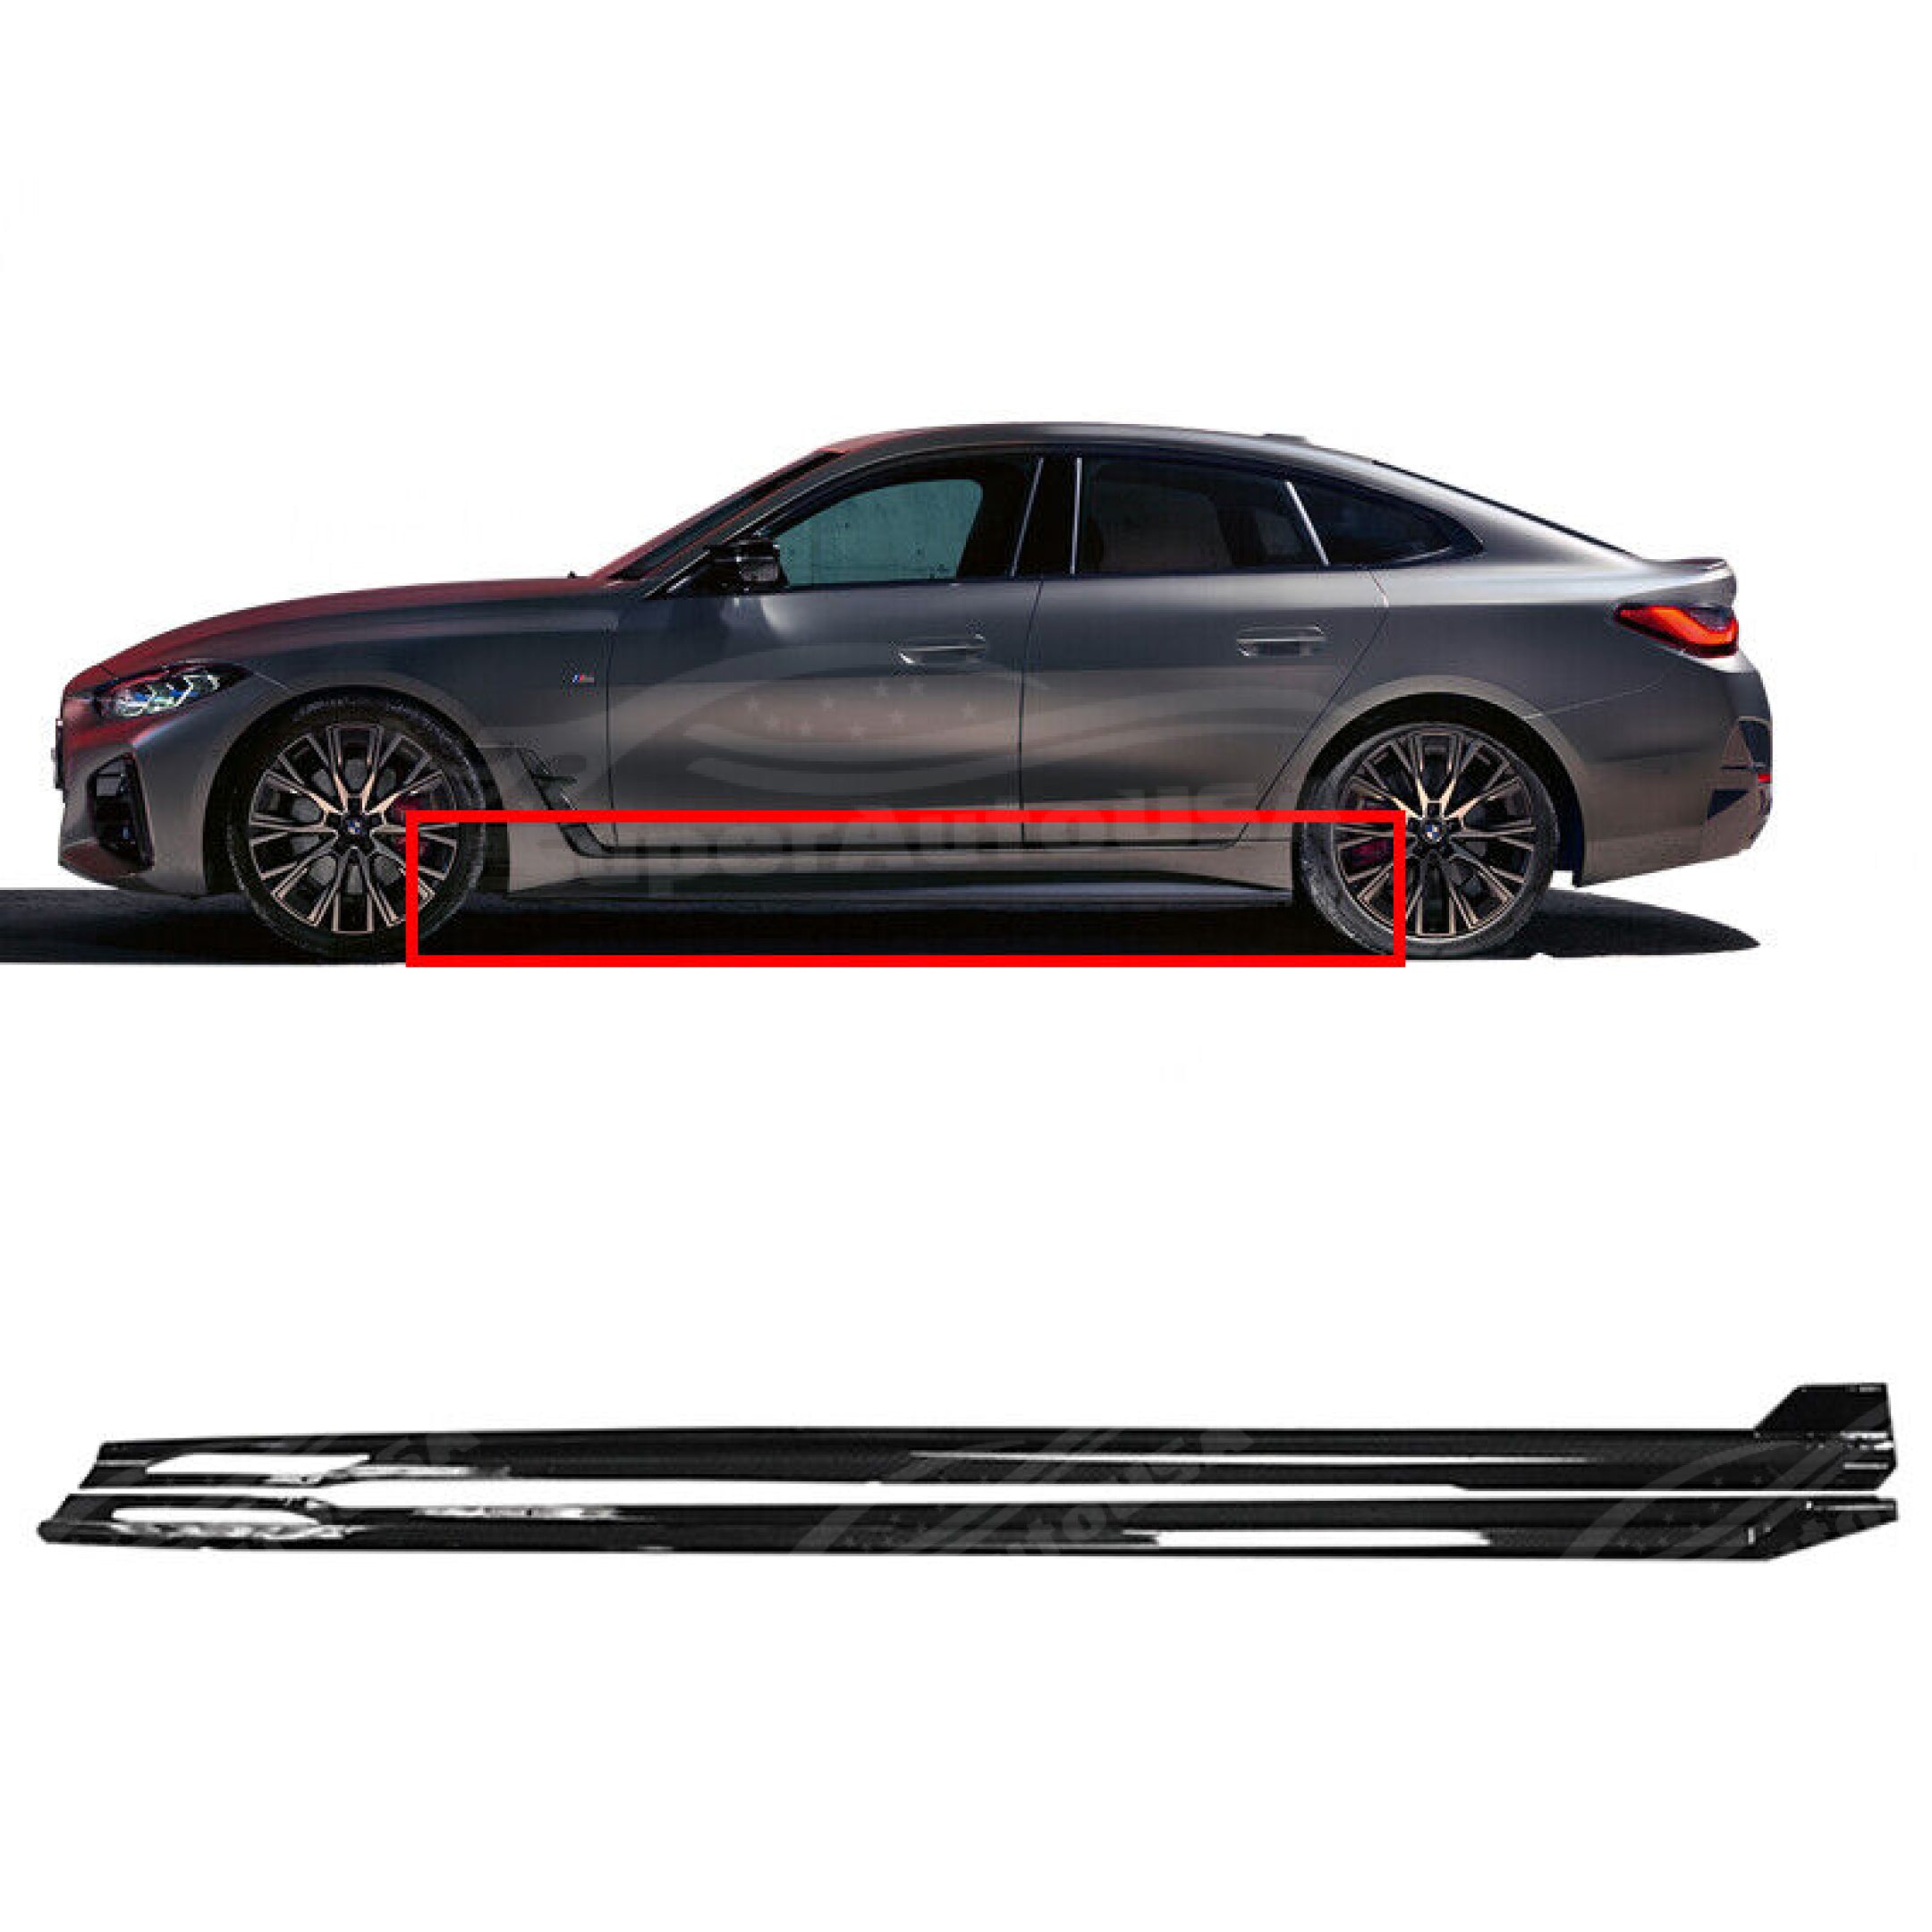 Gloss black side skirts on BMW 4 Series G26, emphasizing the Side Body Skirts Kit for a more aggressive and grounded appearance.